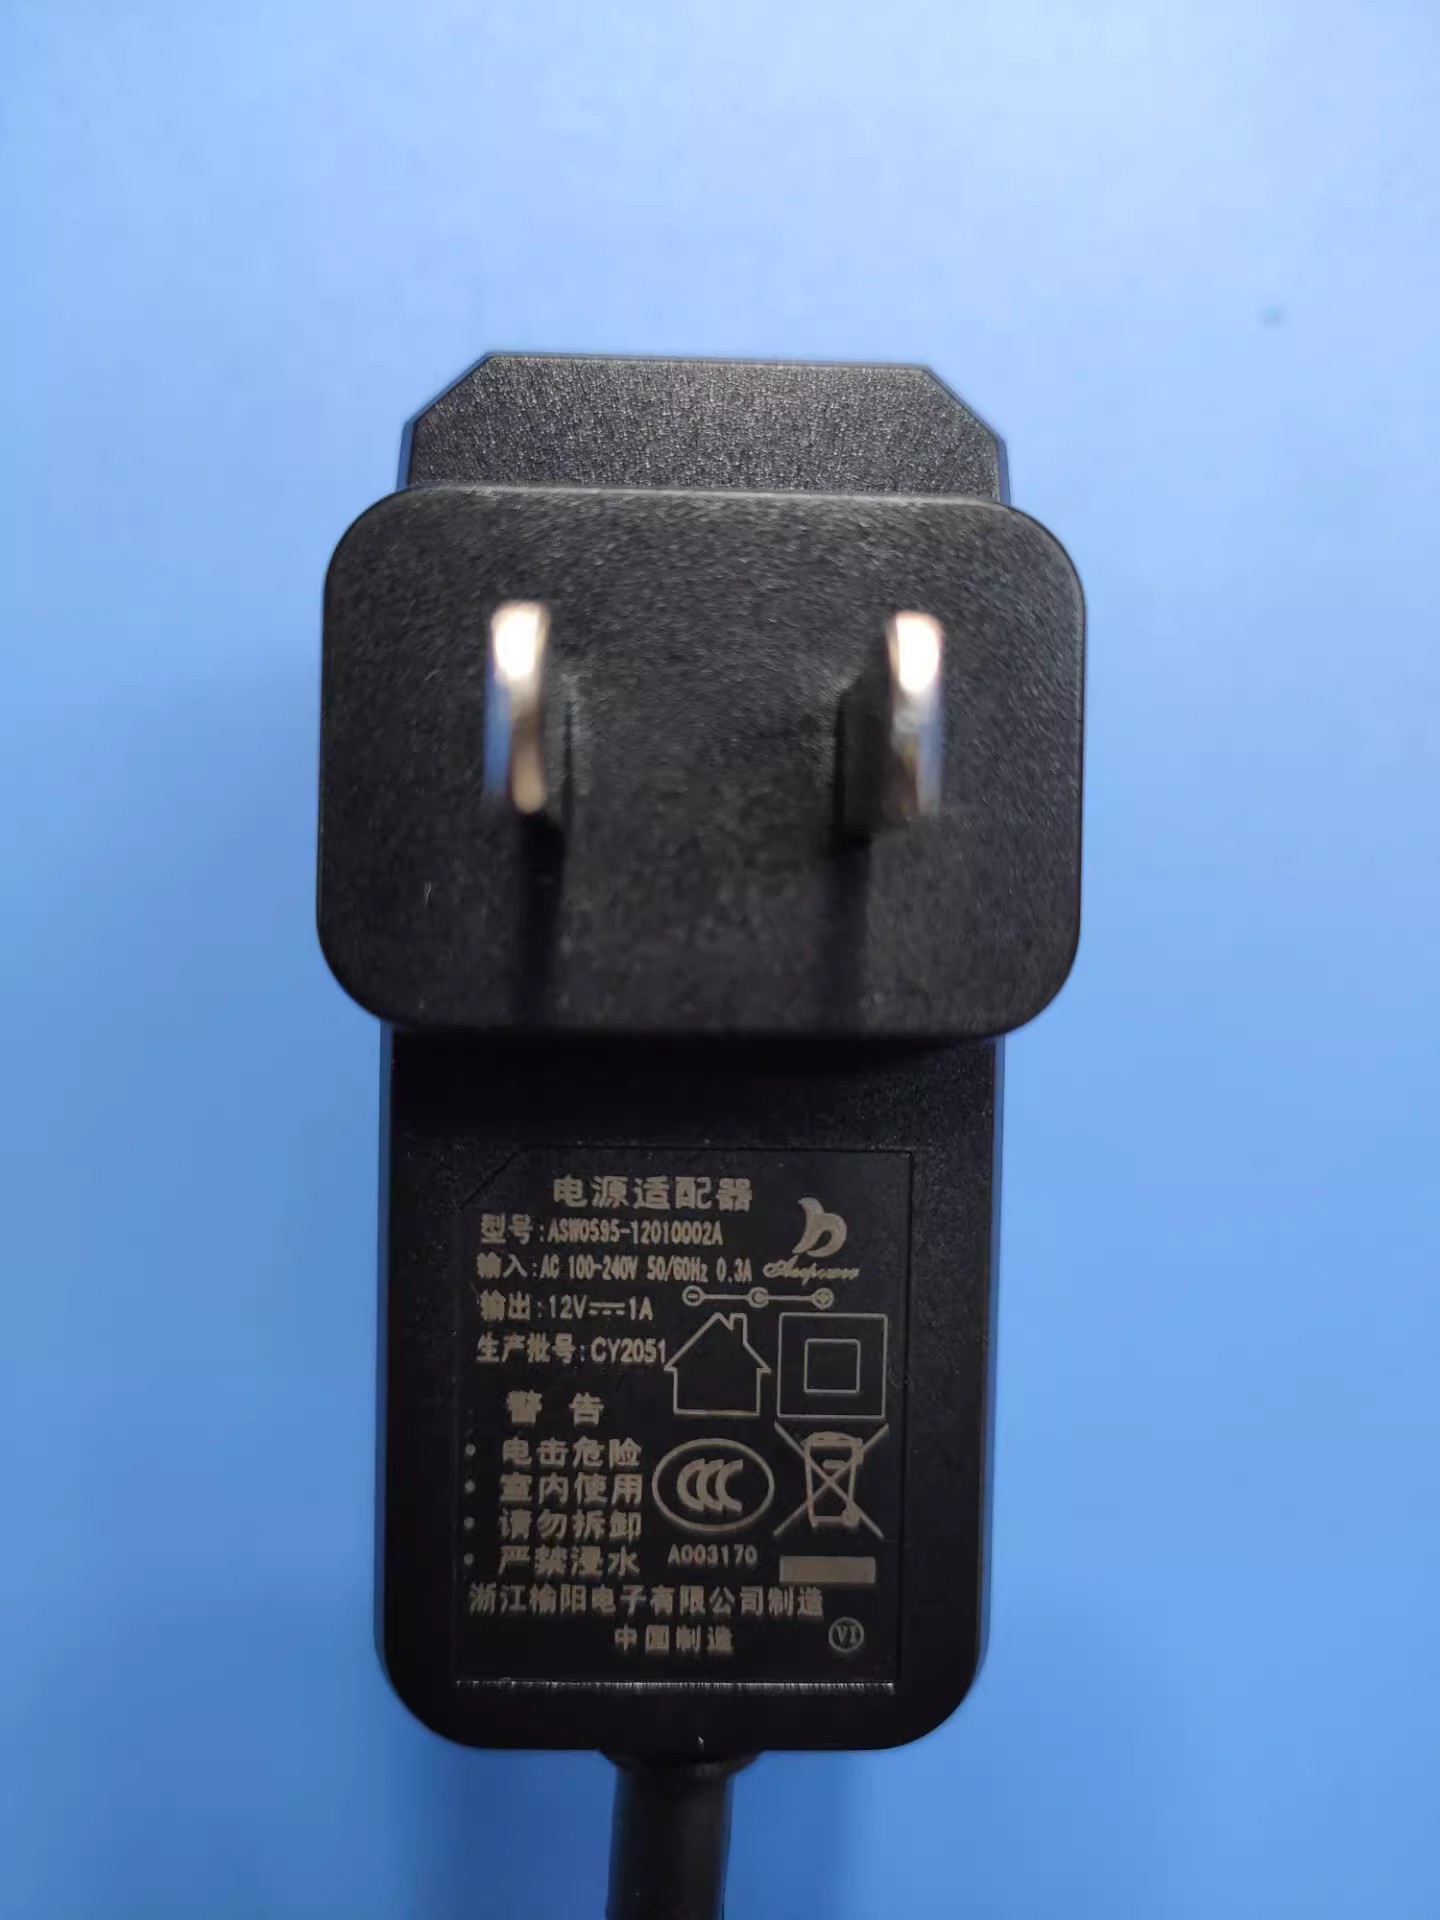 *Brand NEW* 12V 1A AC DC ADAPTHE C2W C8C C3W C5 C4C C3S C4S ASW0S95-12010002A POWER Supply